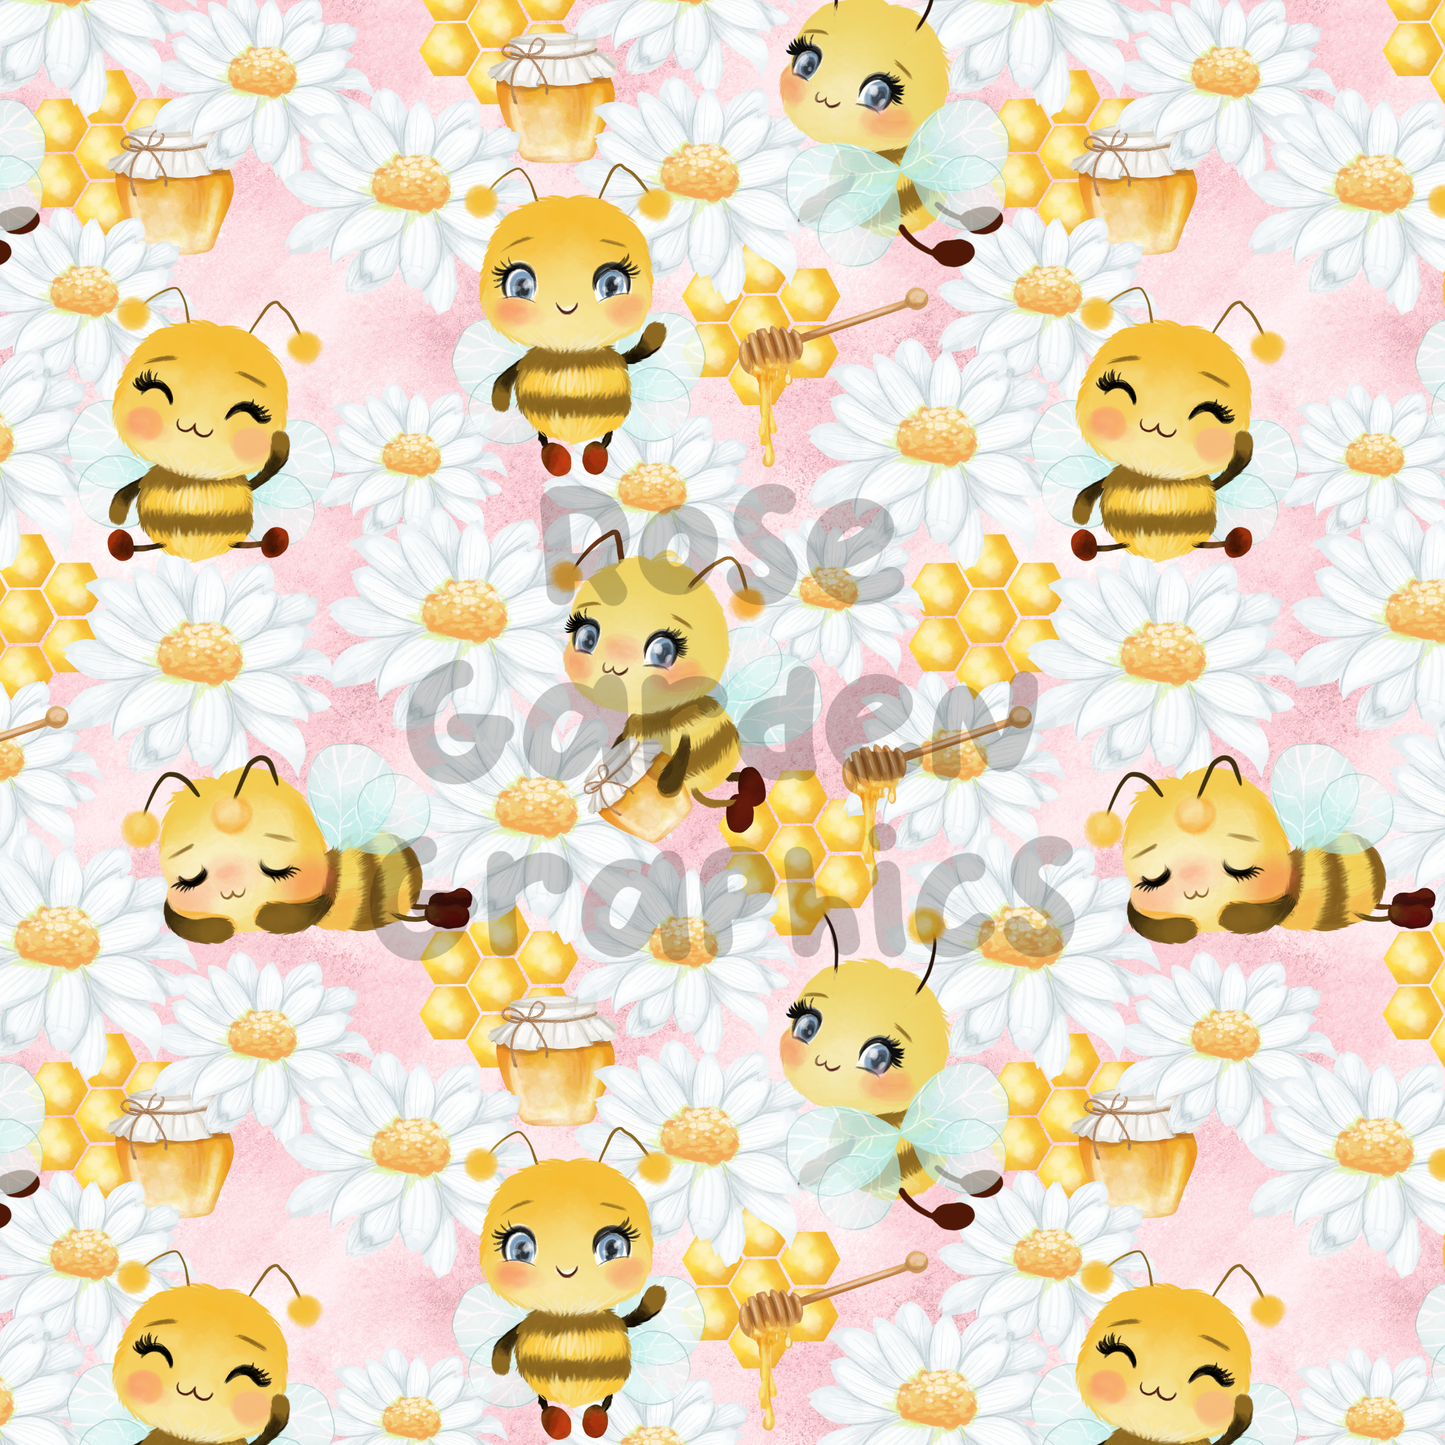 Bees Floral 3 Seamless Images